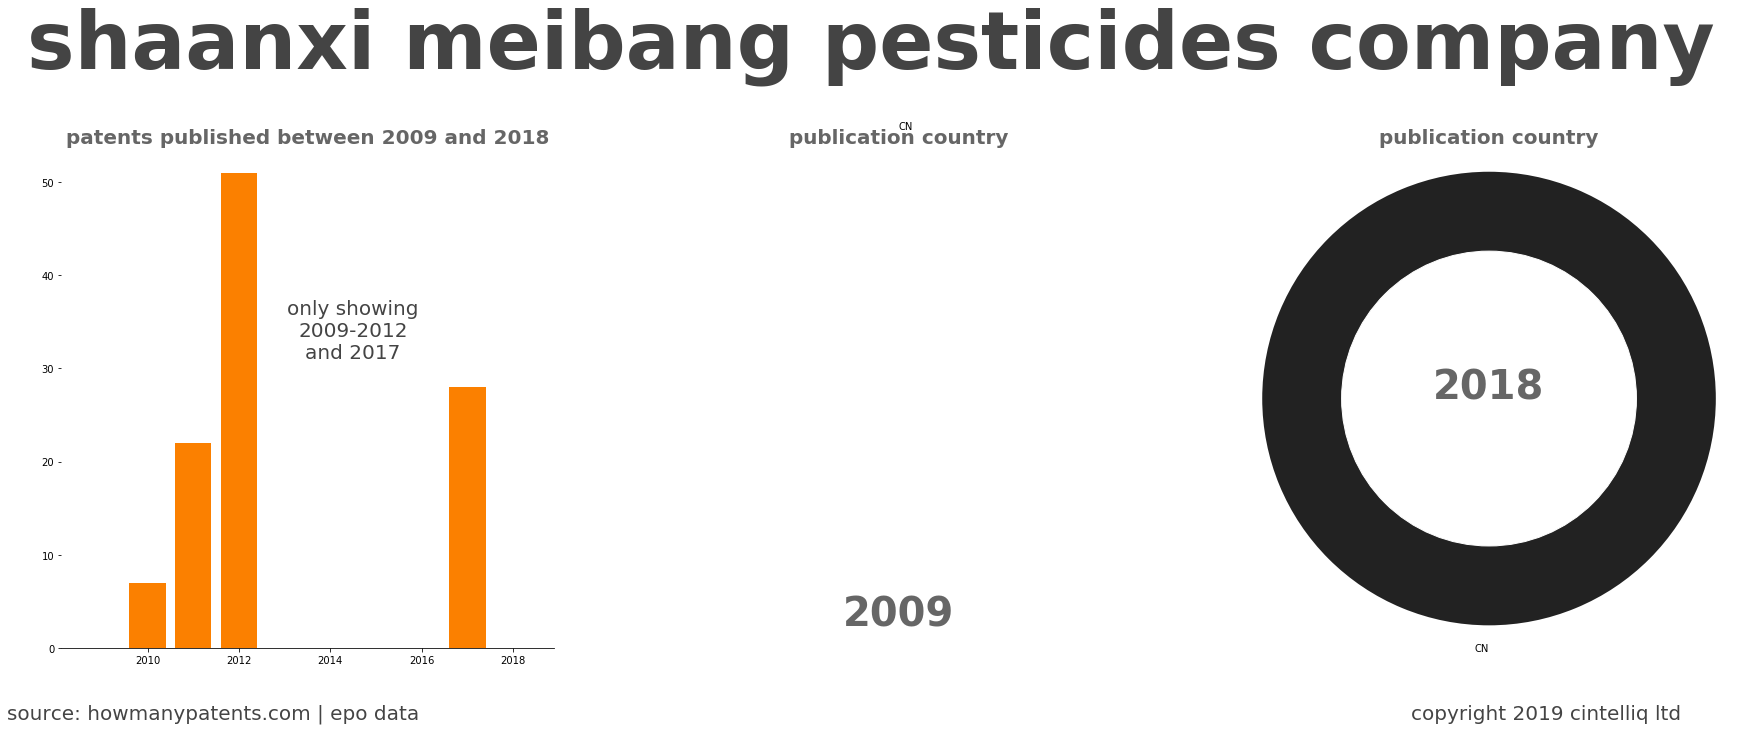 summary of patents for Shaanxi Meibang Pesticides Company